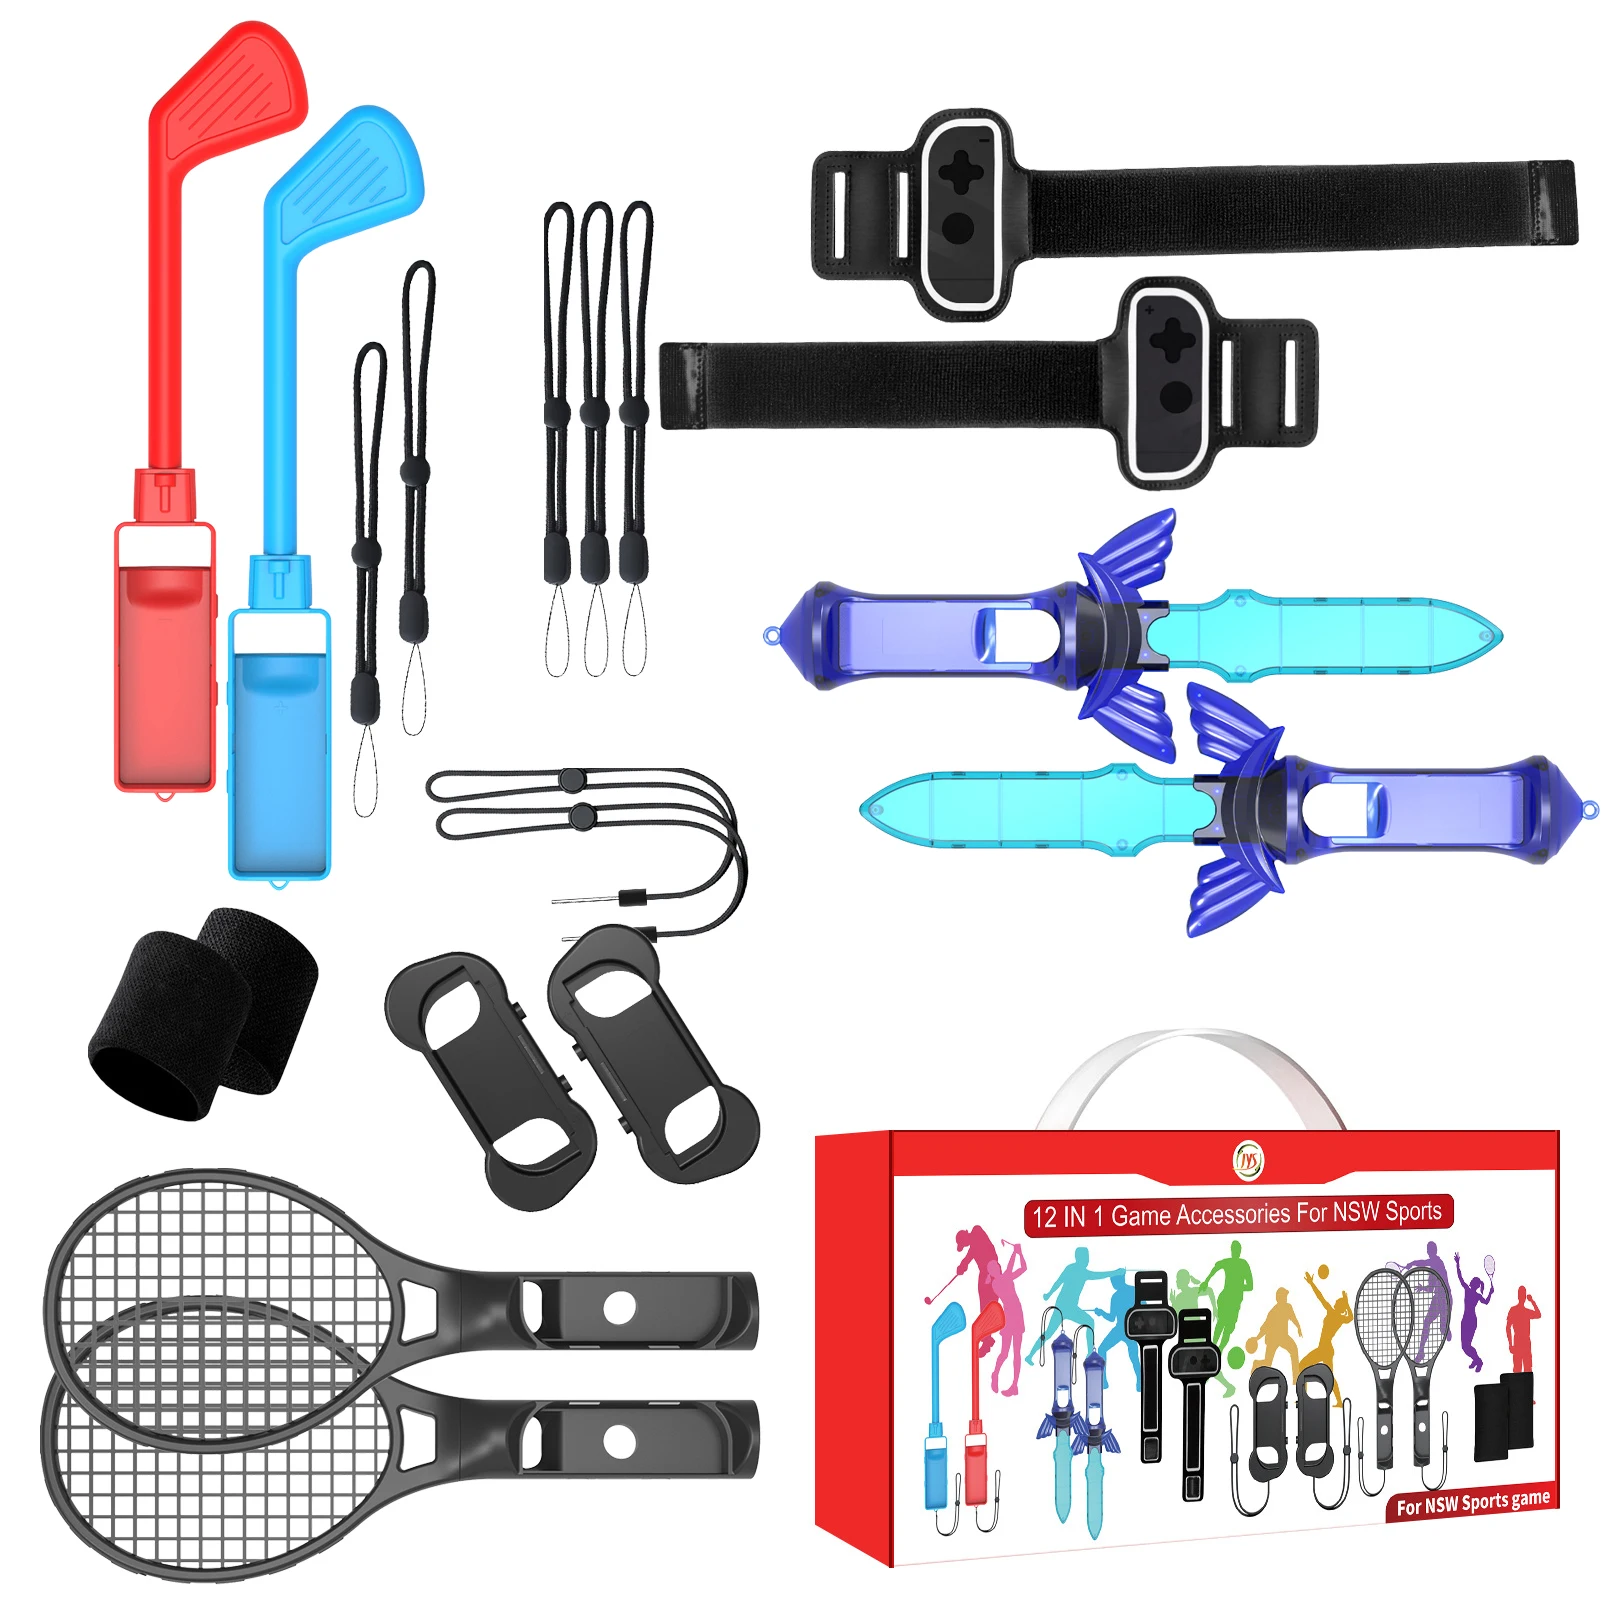 

Switch OLED Accessories 12 In 1 For NS Switch Sports Control Set Wristband Tennis Racket Fitness Leg Strap Sword Ideal Game Gift